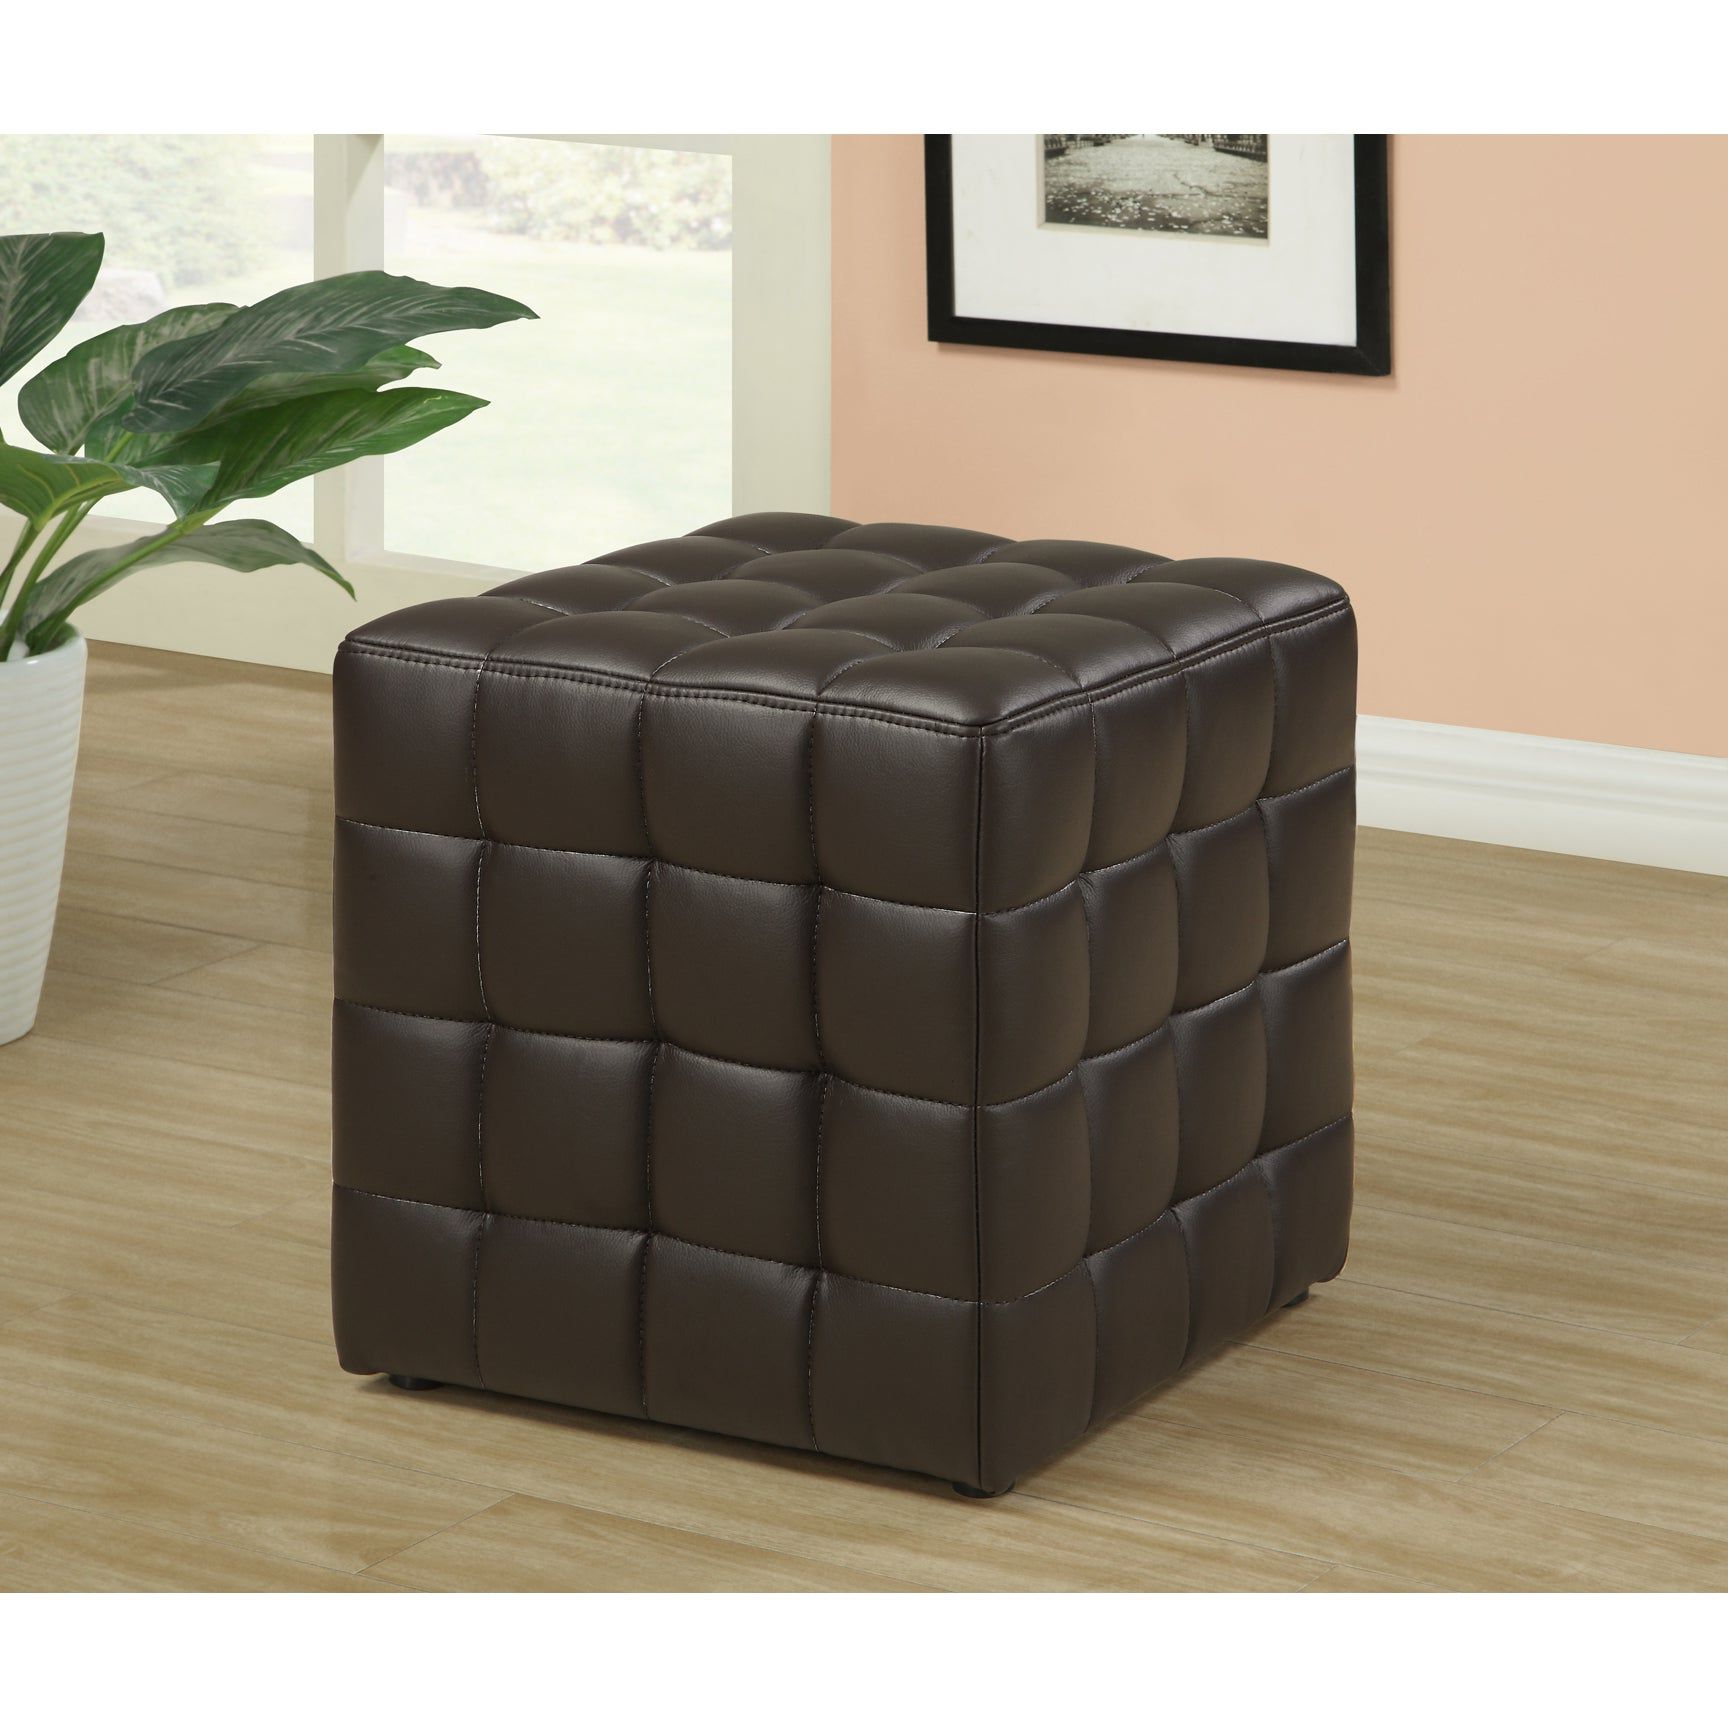 Trendy Dark Brown Leather Look Ottoman – Free Shipping Today – Overstock In Round Gold Faux Leather Ottomans With Pull Tab (View 8 of 10)